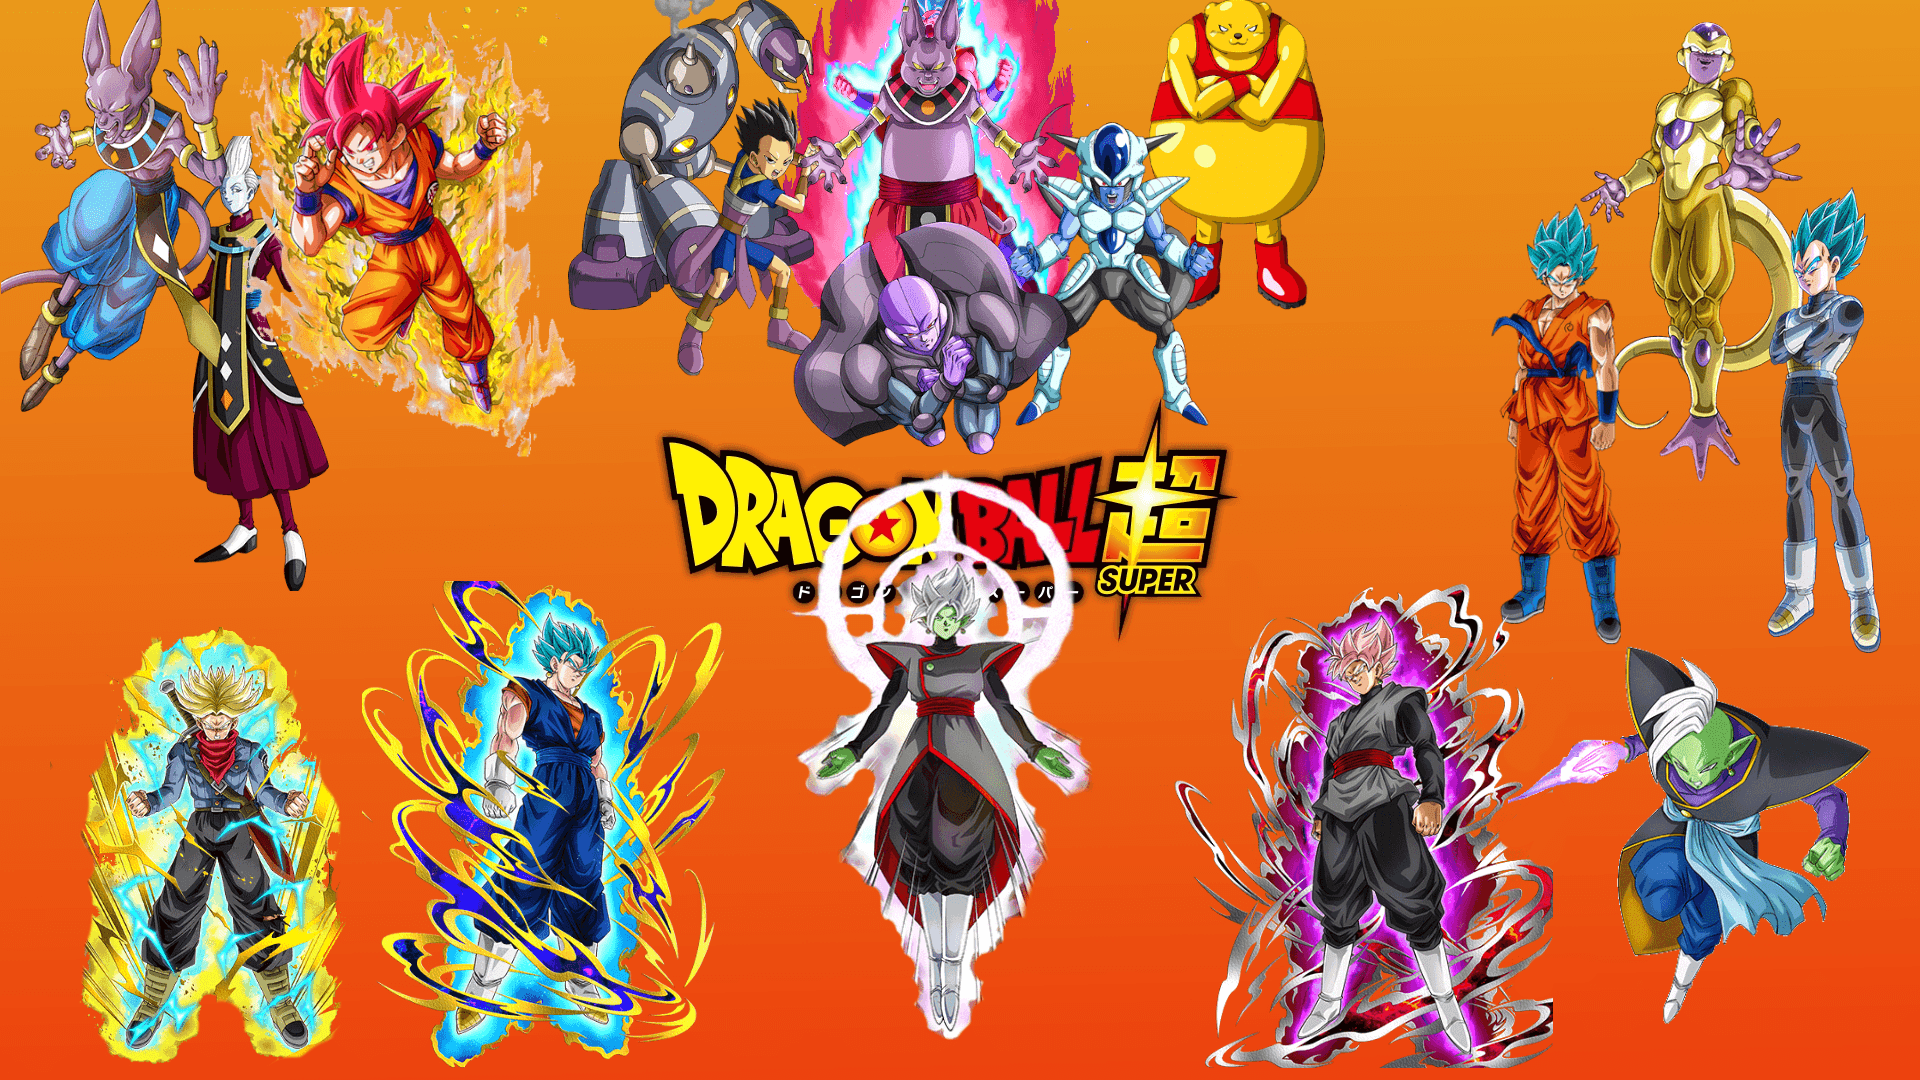 I made a Dragon Ball Super wallpapers using cards from DBZ Dokkan